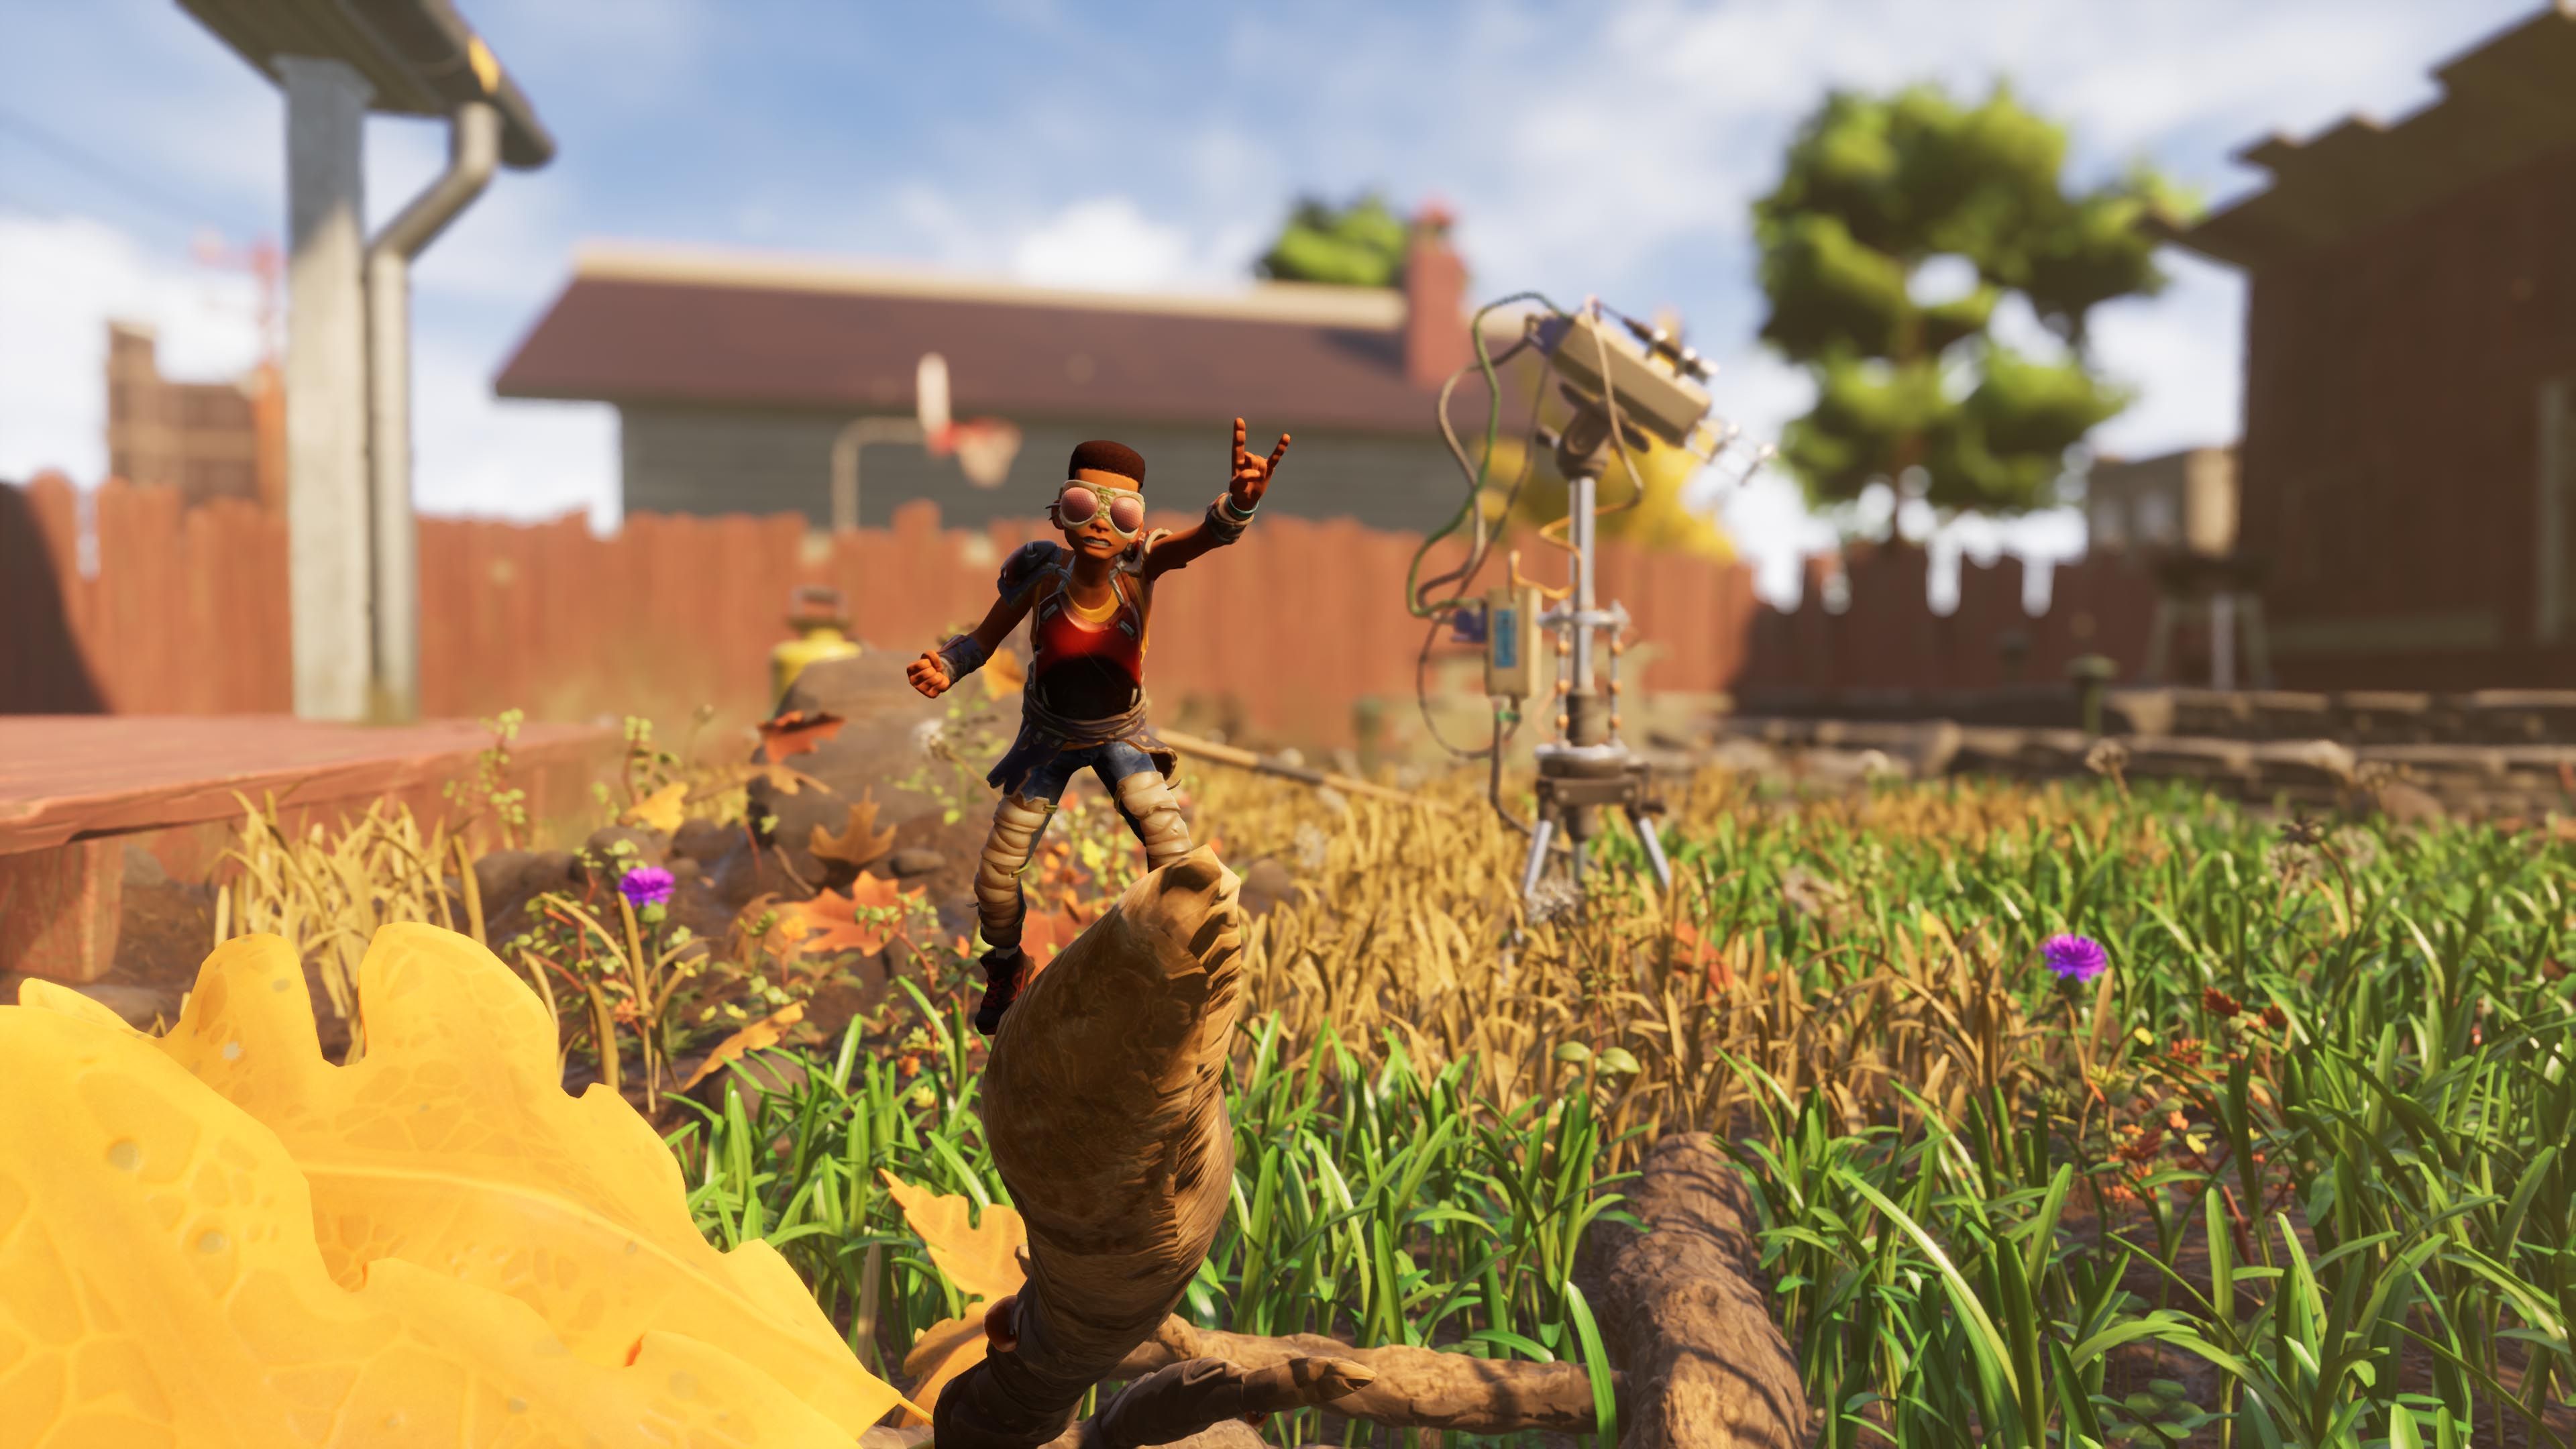 25 games like Minecraft to play that will let your imagination run